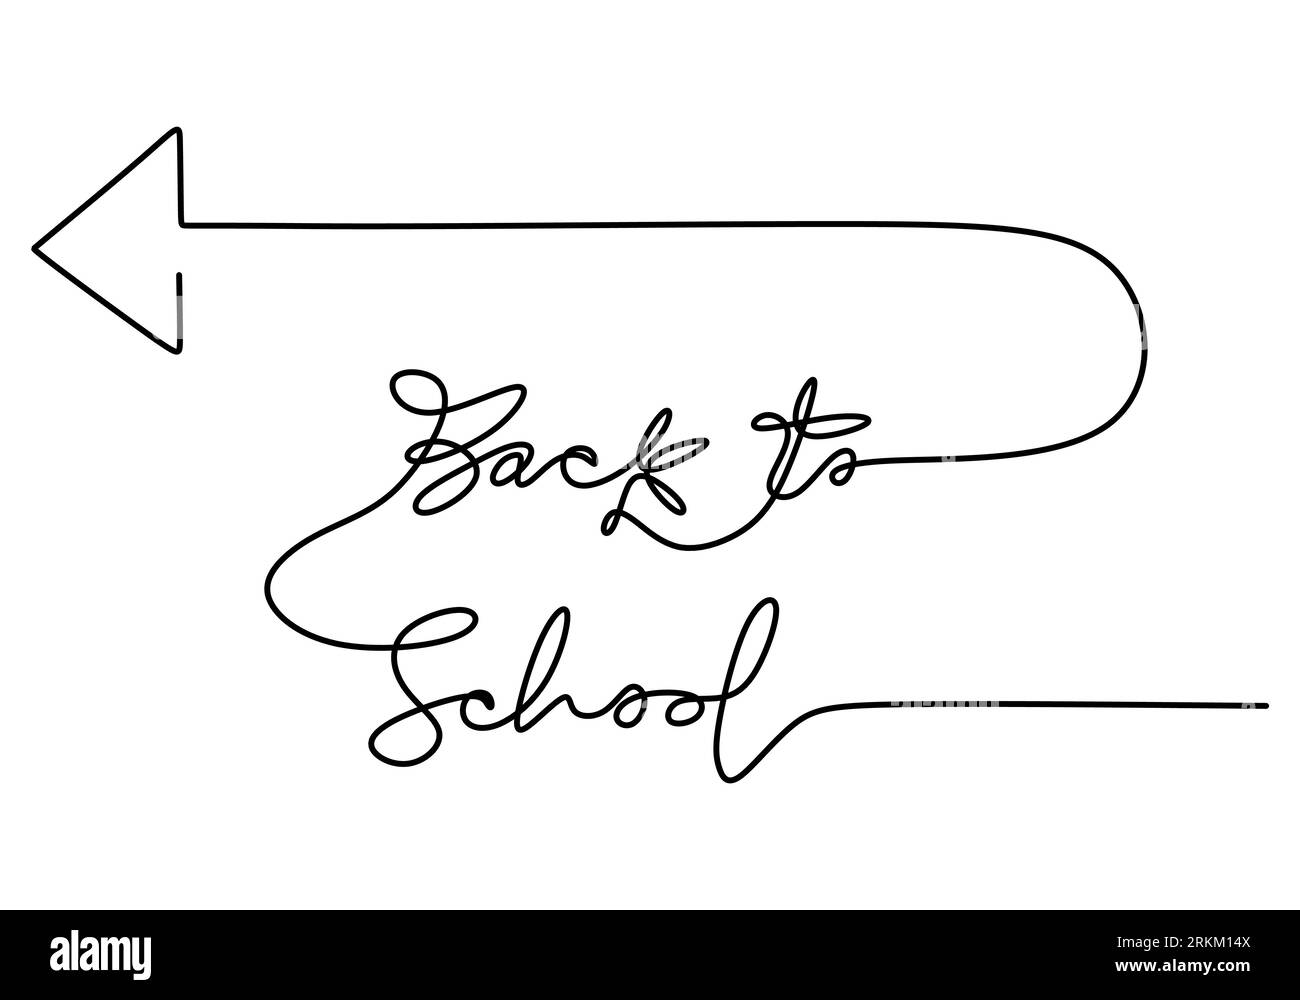 Continuous one line drawing of back to school handwritten words with arrow navigation isolated on white background. Stock Vector